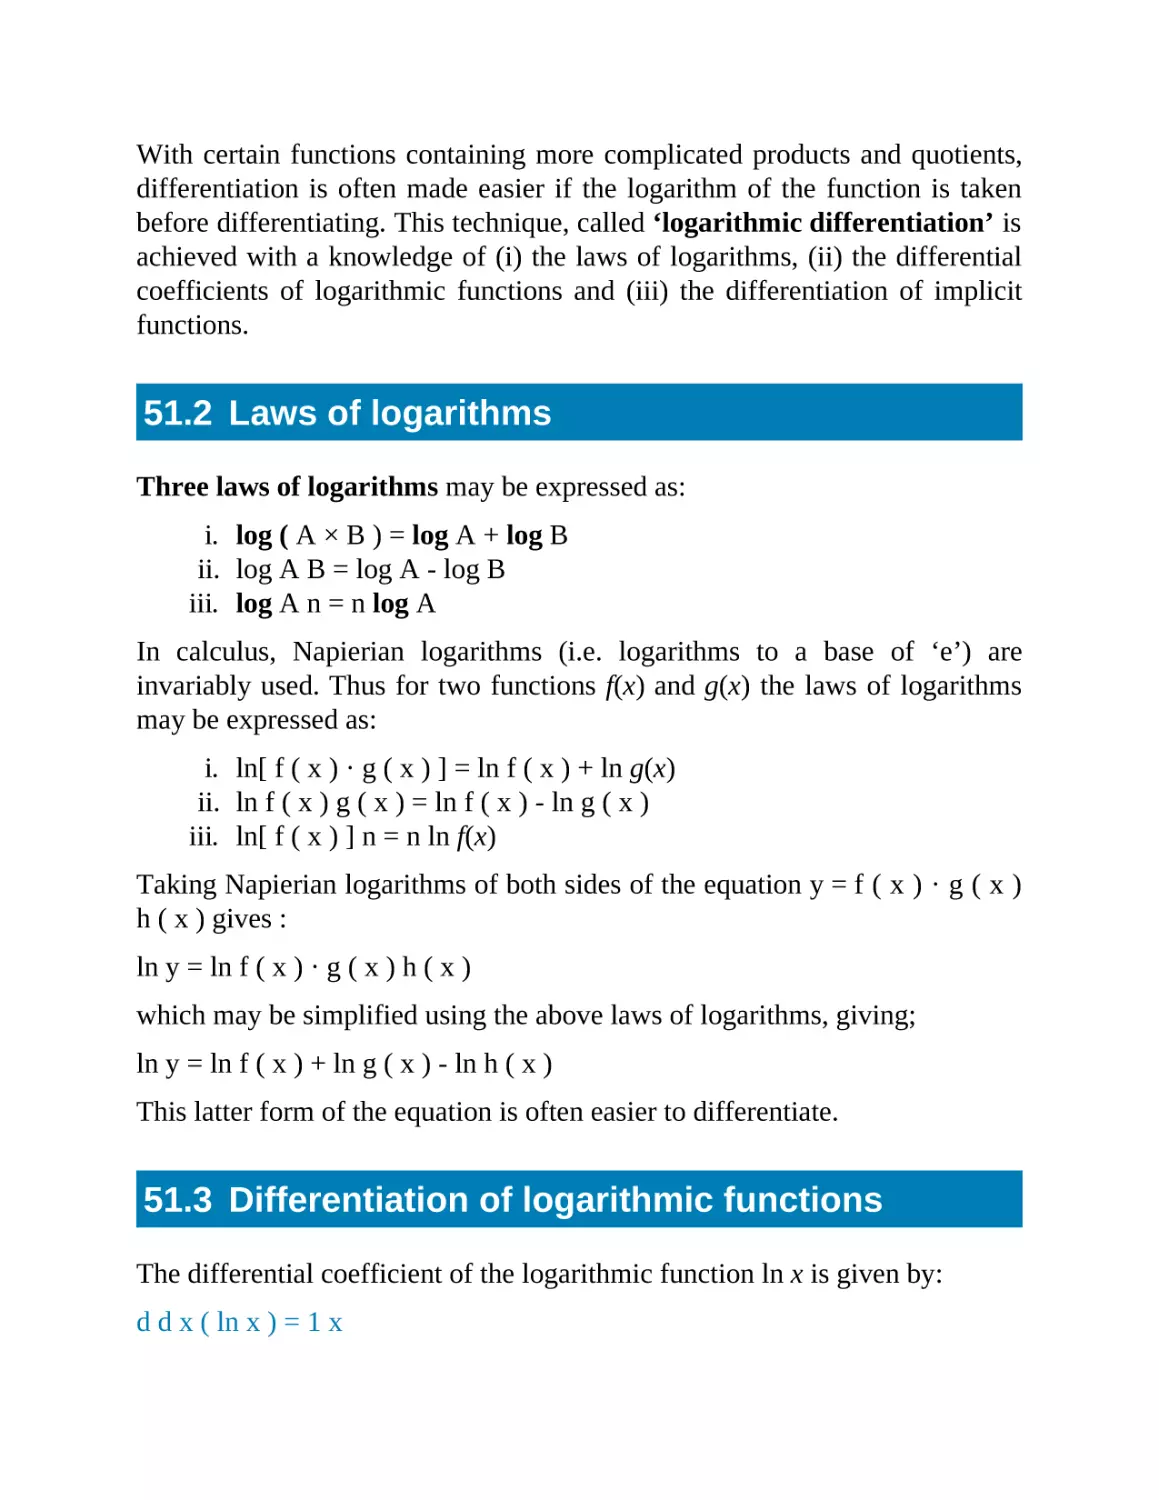 51.2 Laws of logarithms
51.3 Differentiation of logarithmic functions